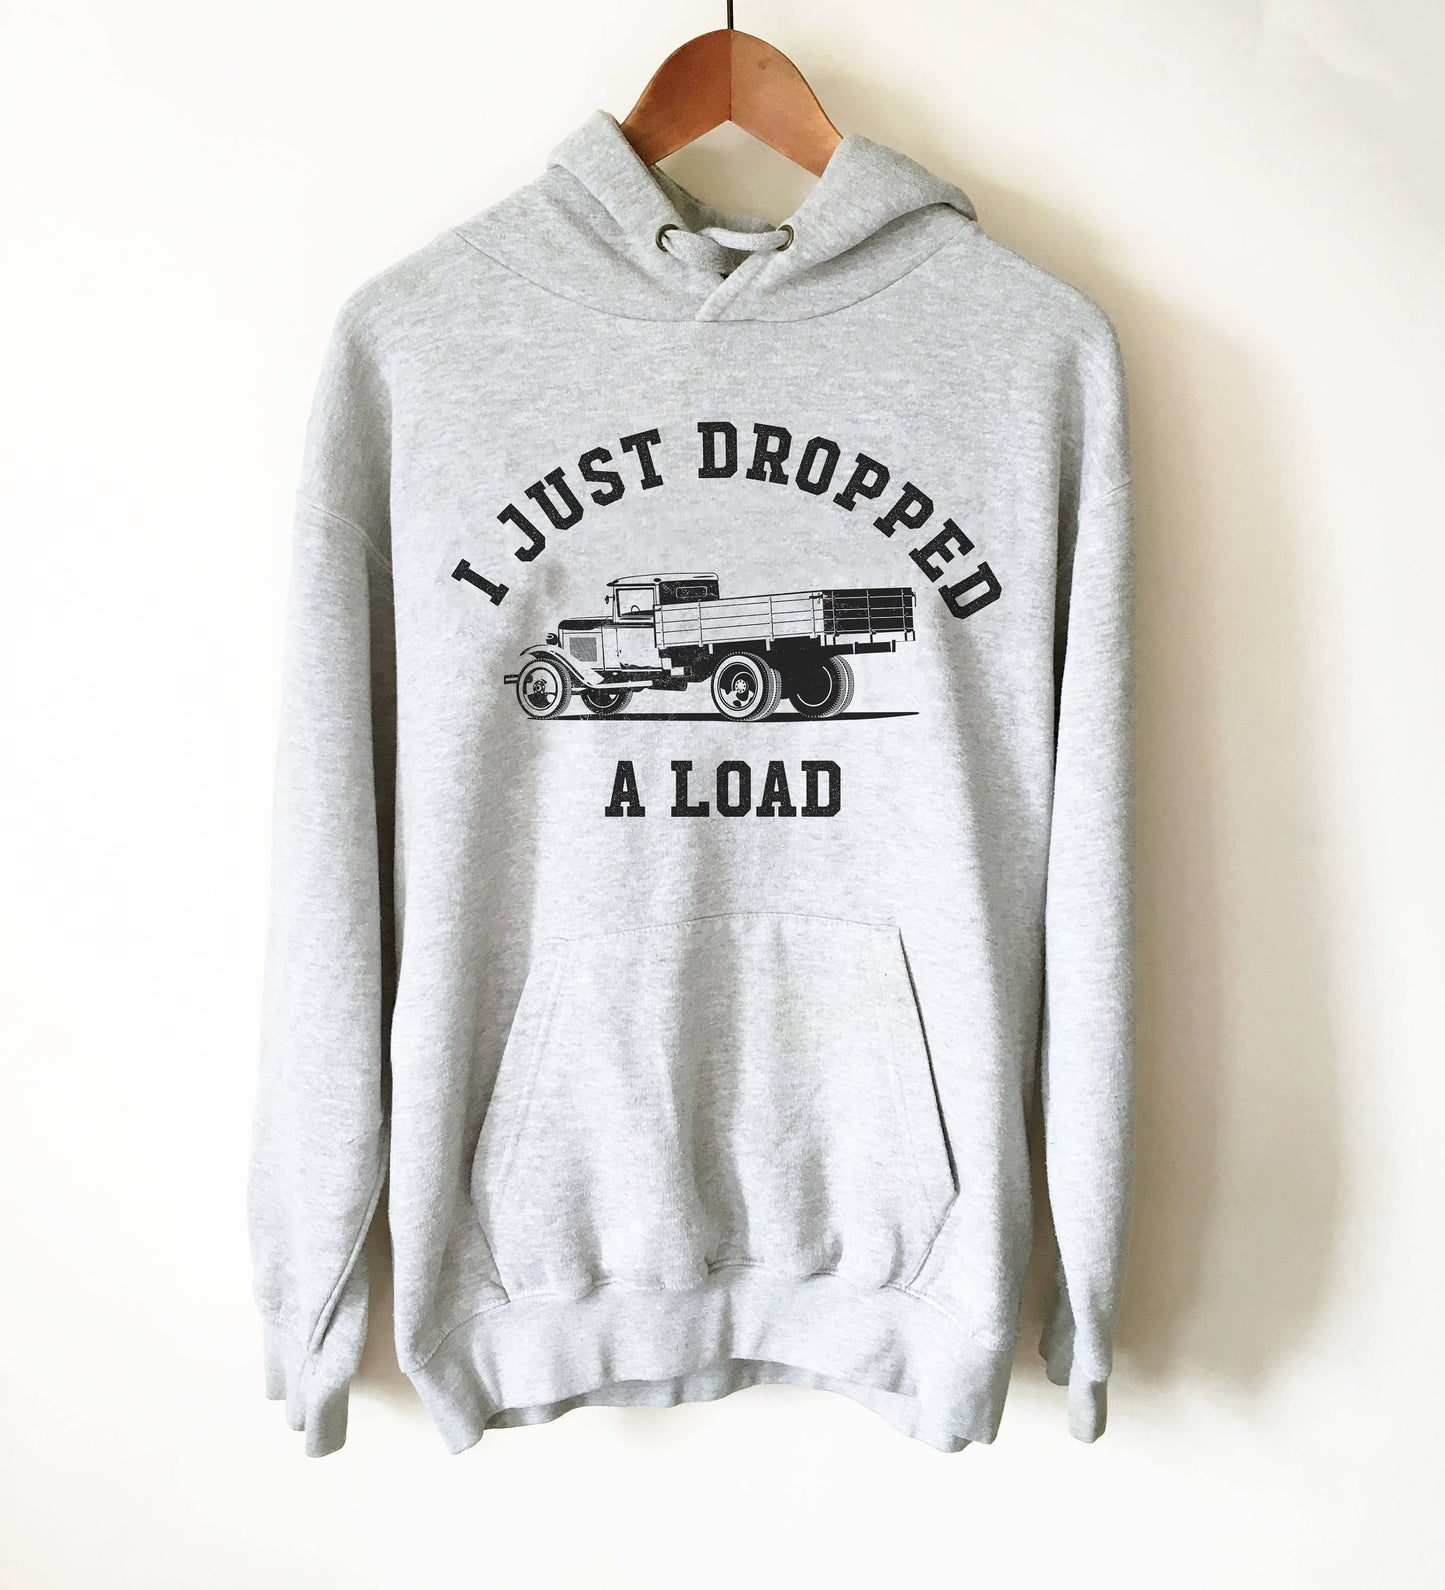 I Just Dropped A Load Hoodie - Truck Driver Shirt, Truck Driver Gifts, Dump Truck Shirt, Construction Shirt, Garbage Truck Shirt